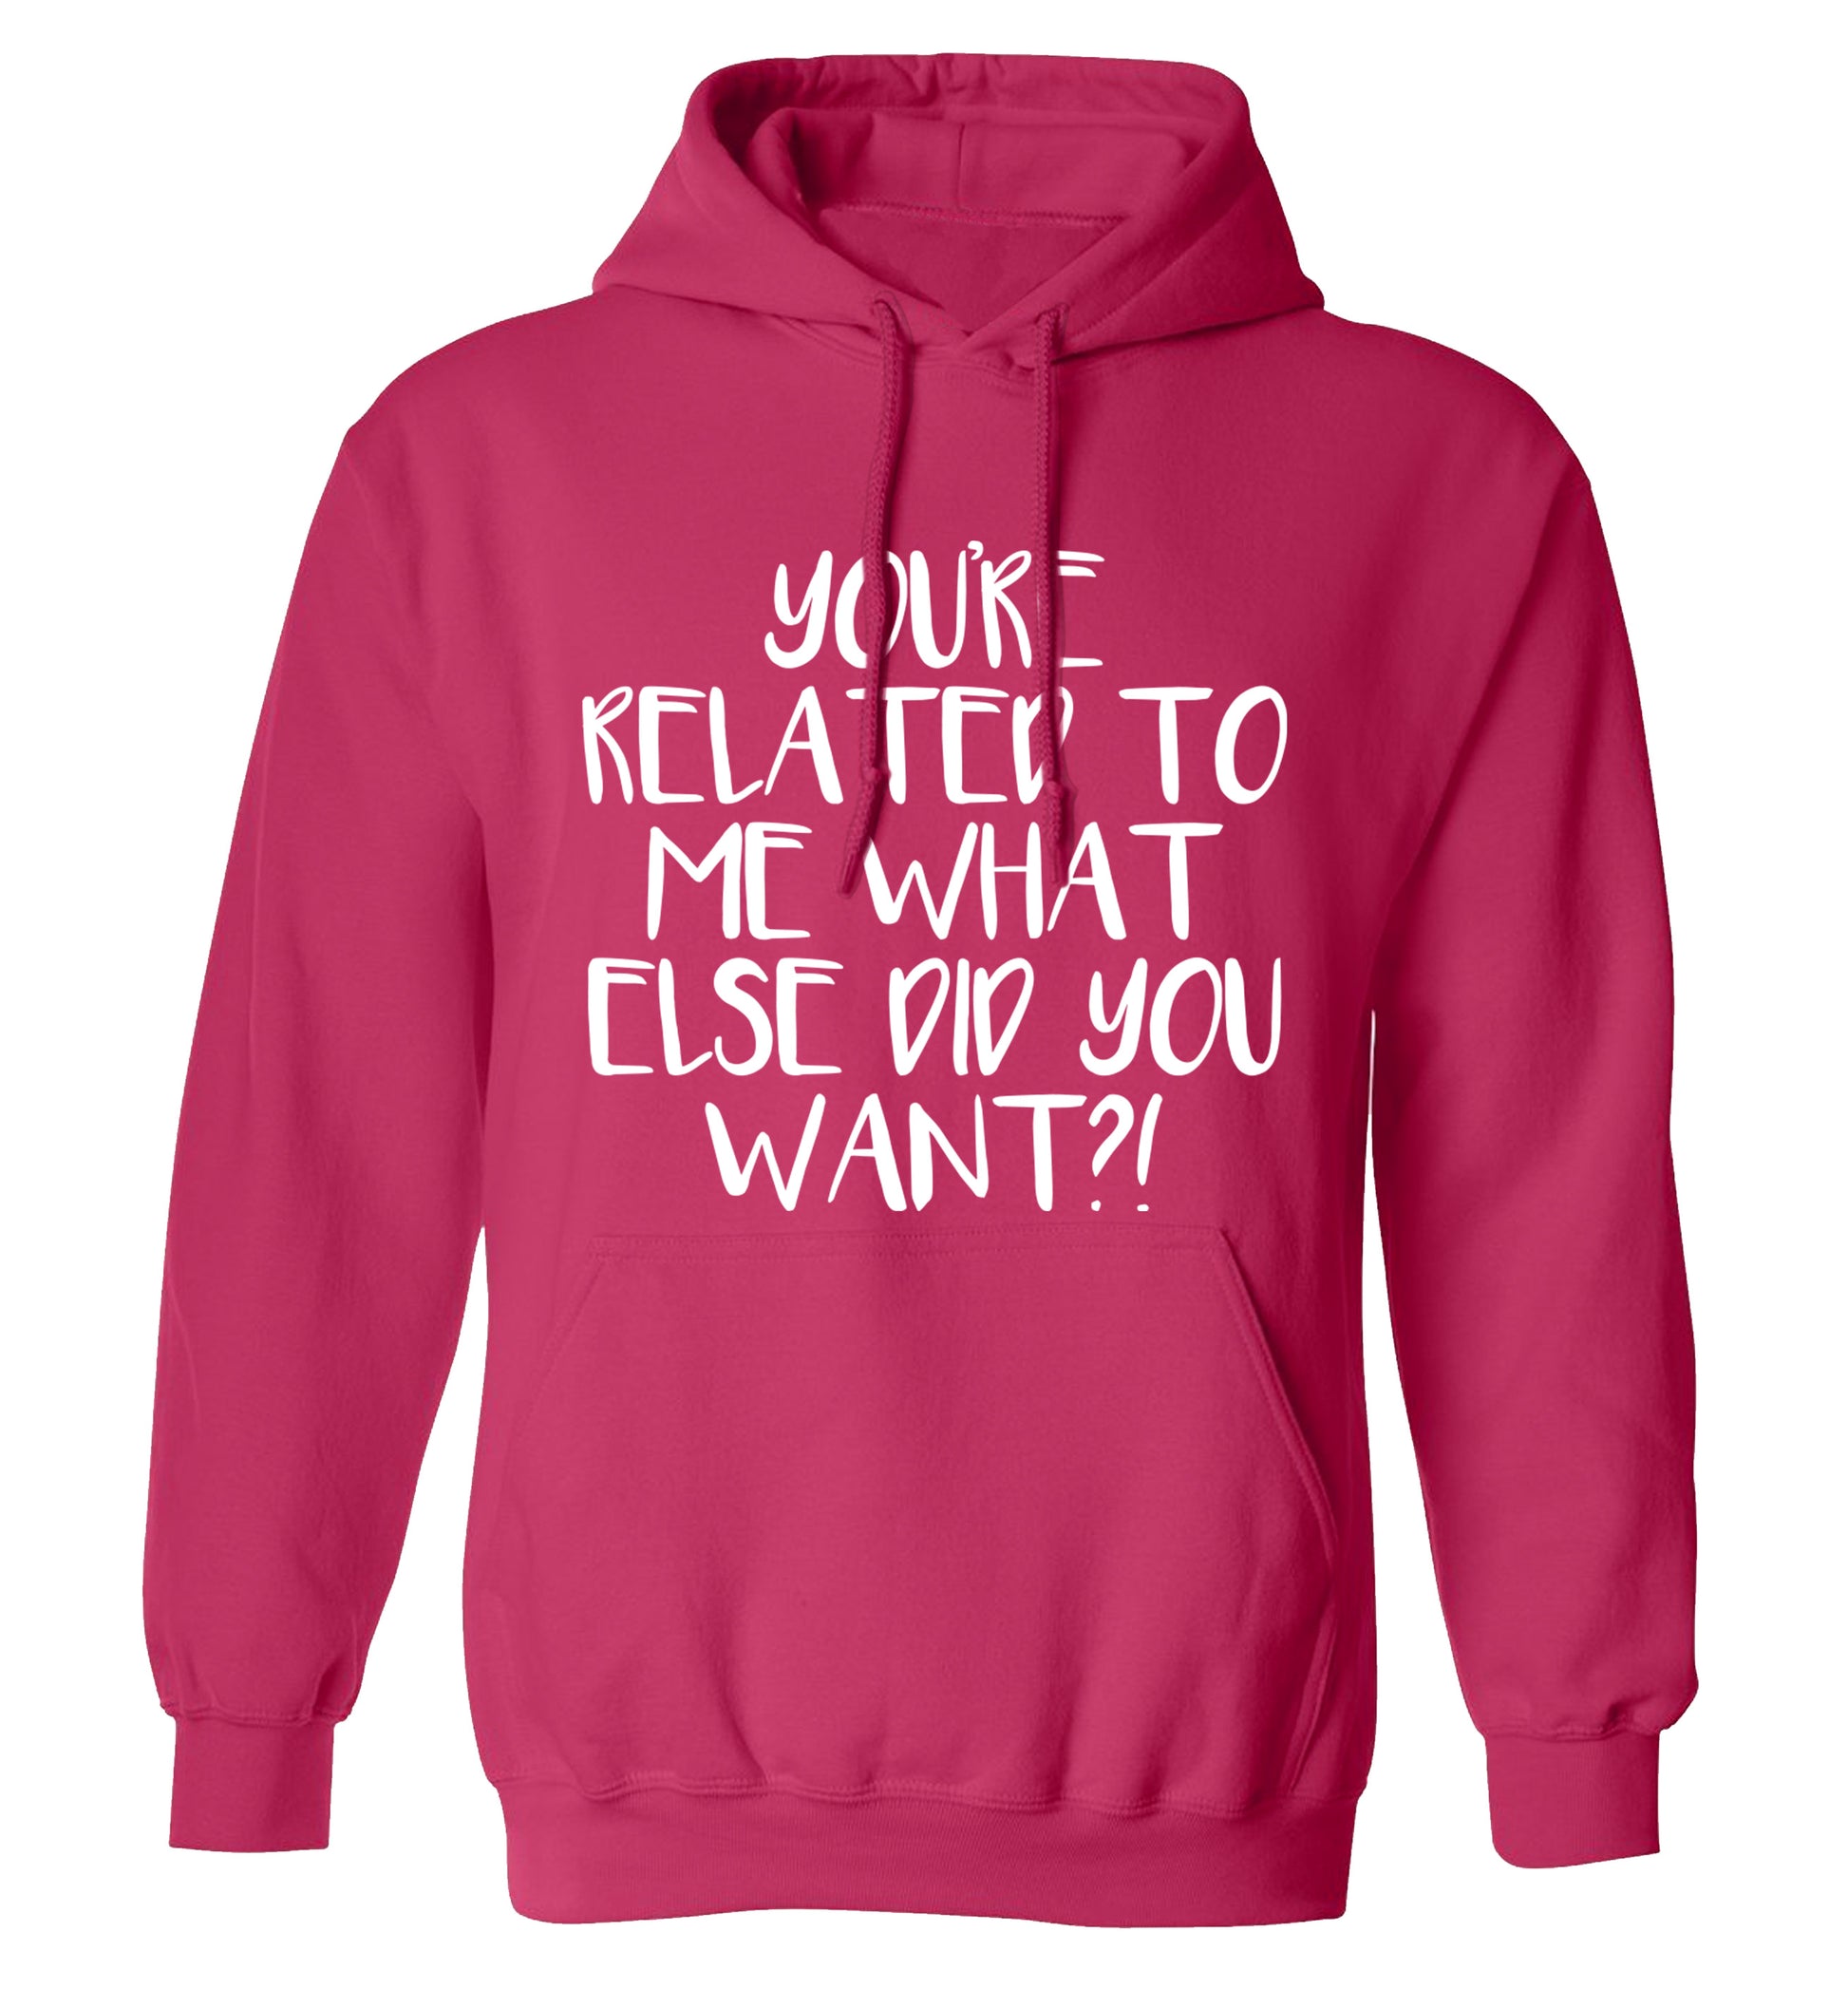 You're related to me what more do you want? adults unisex pink hoodie 2XL